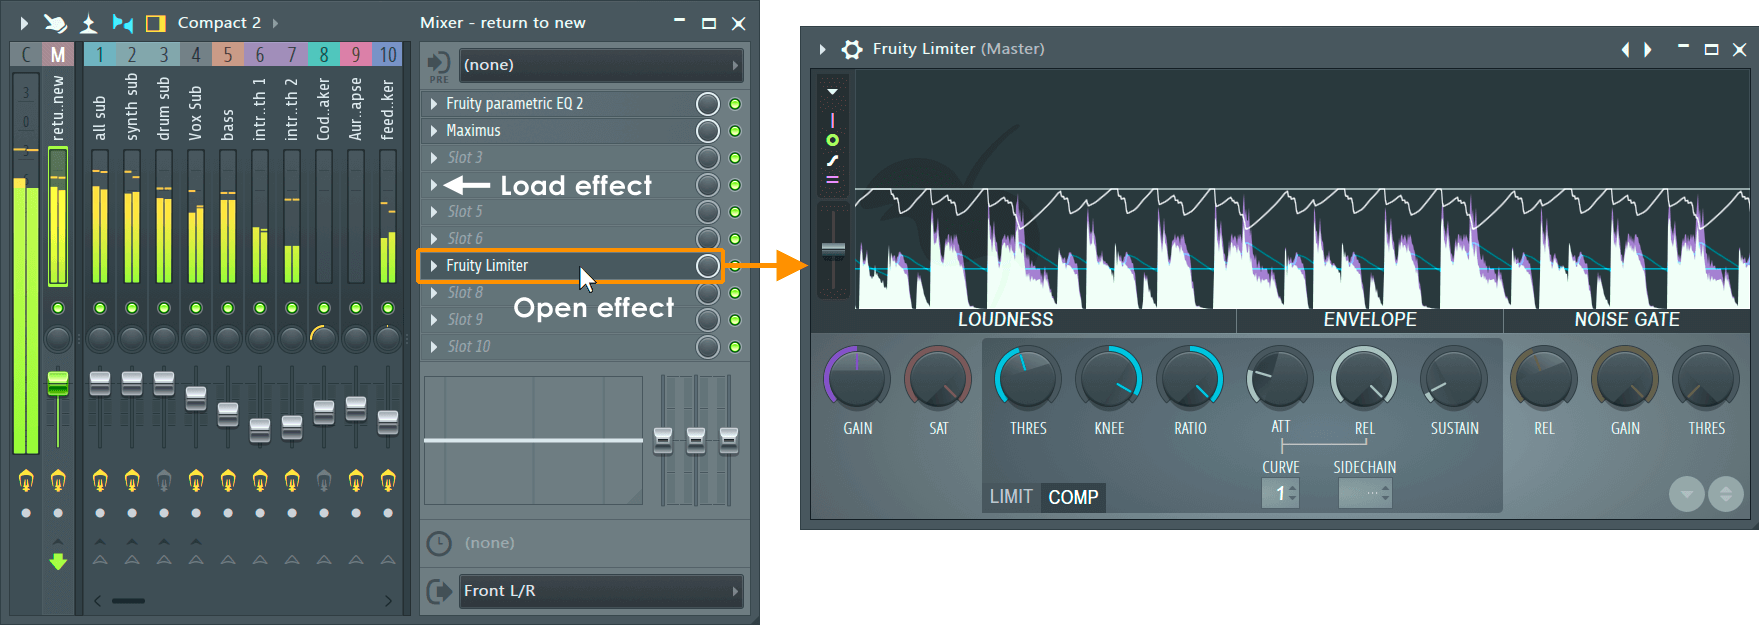 how to bass boost in fl studio 12